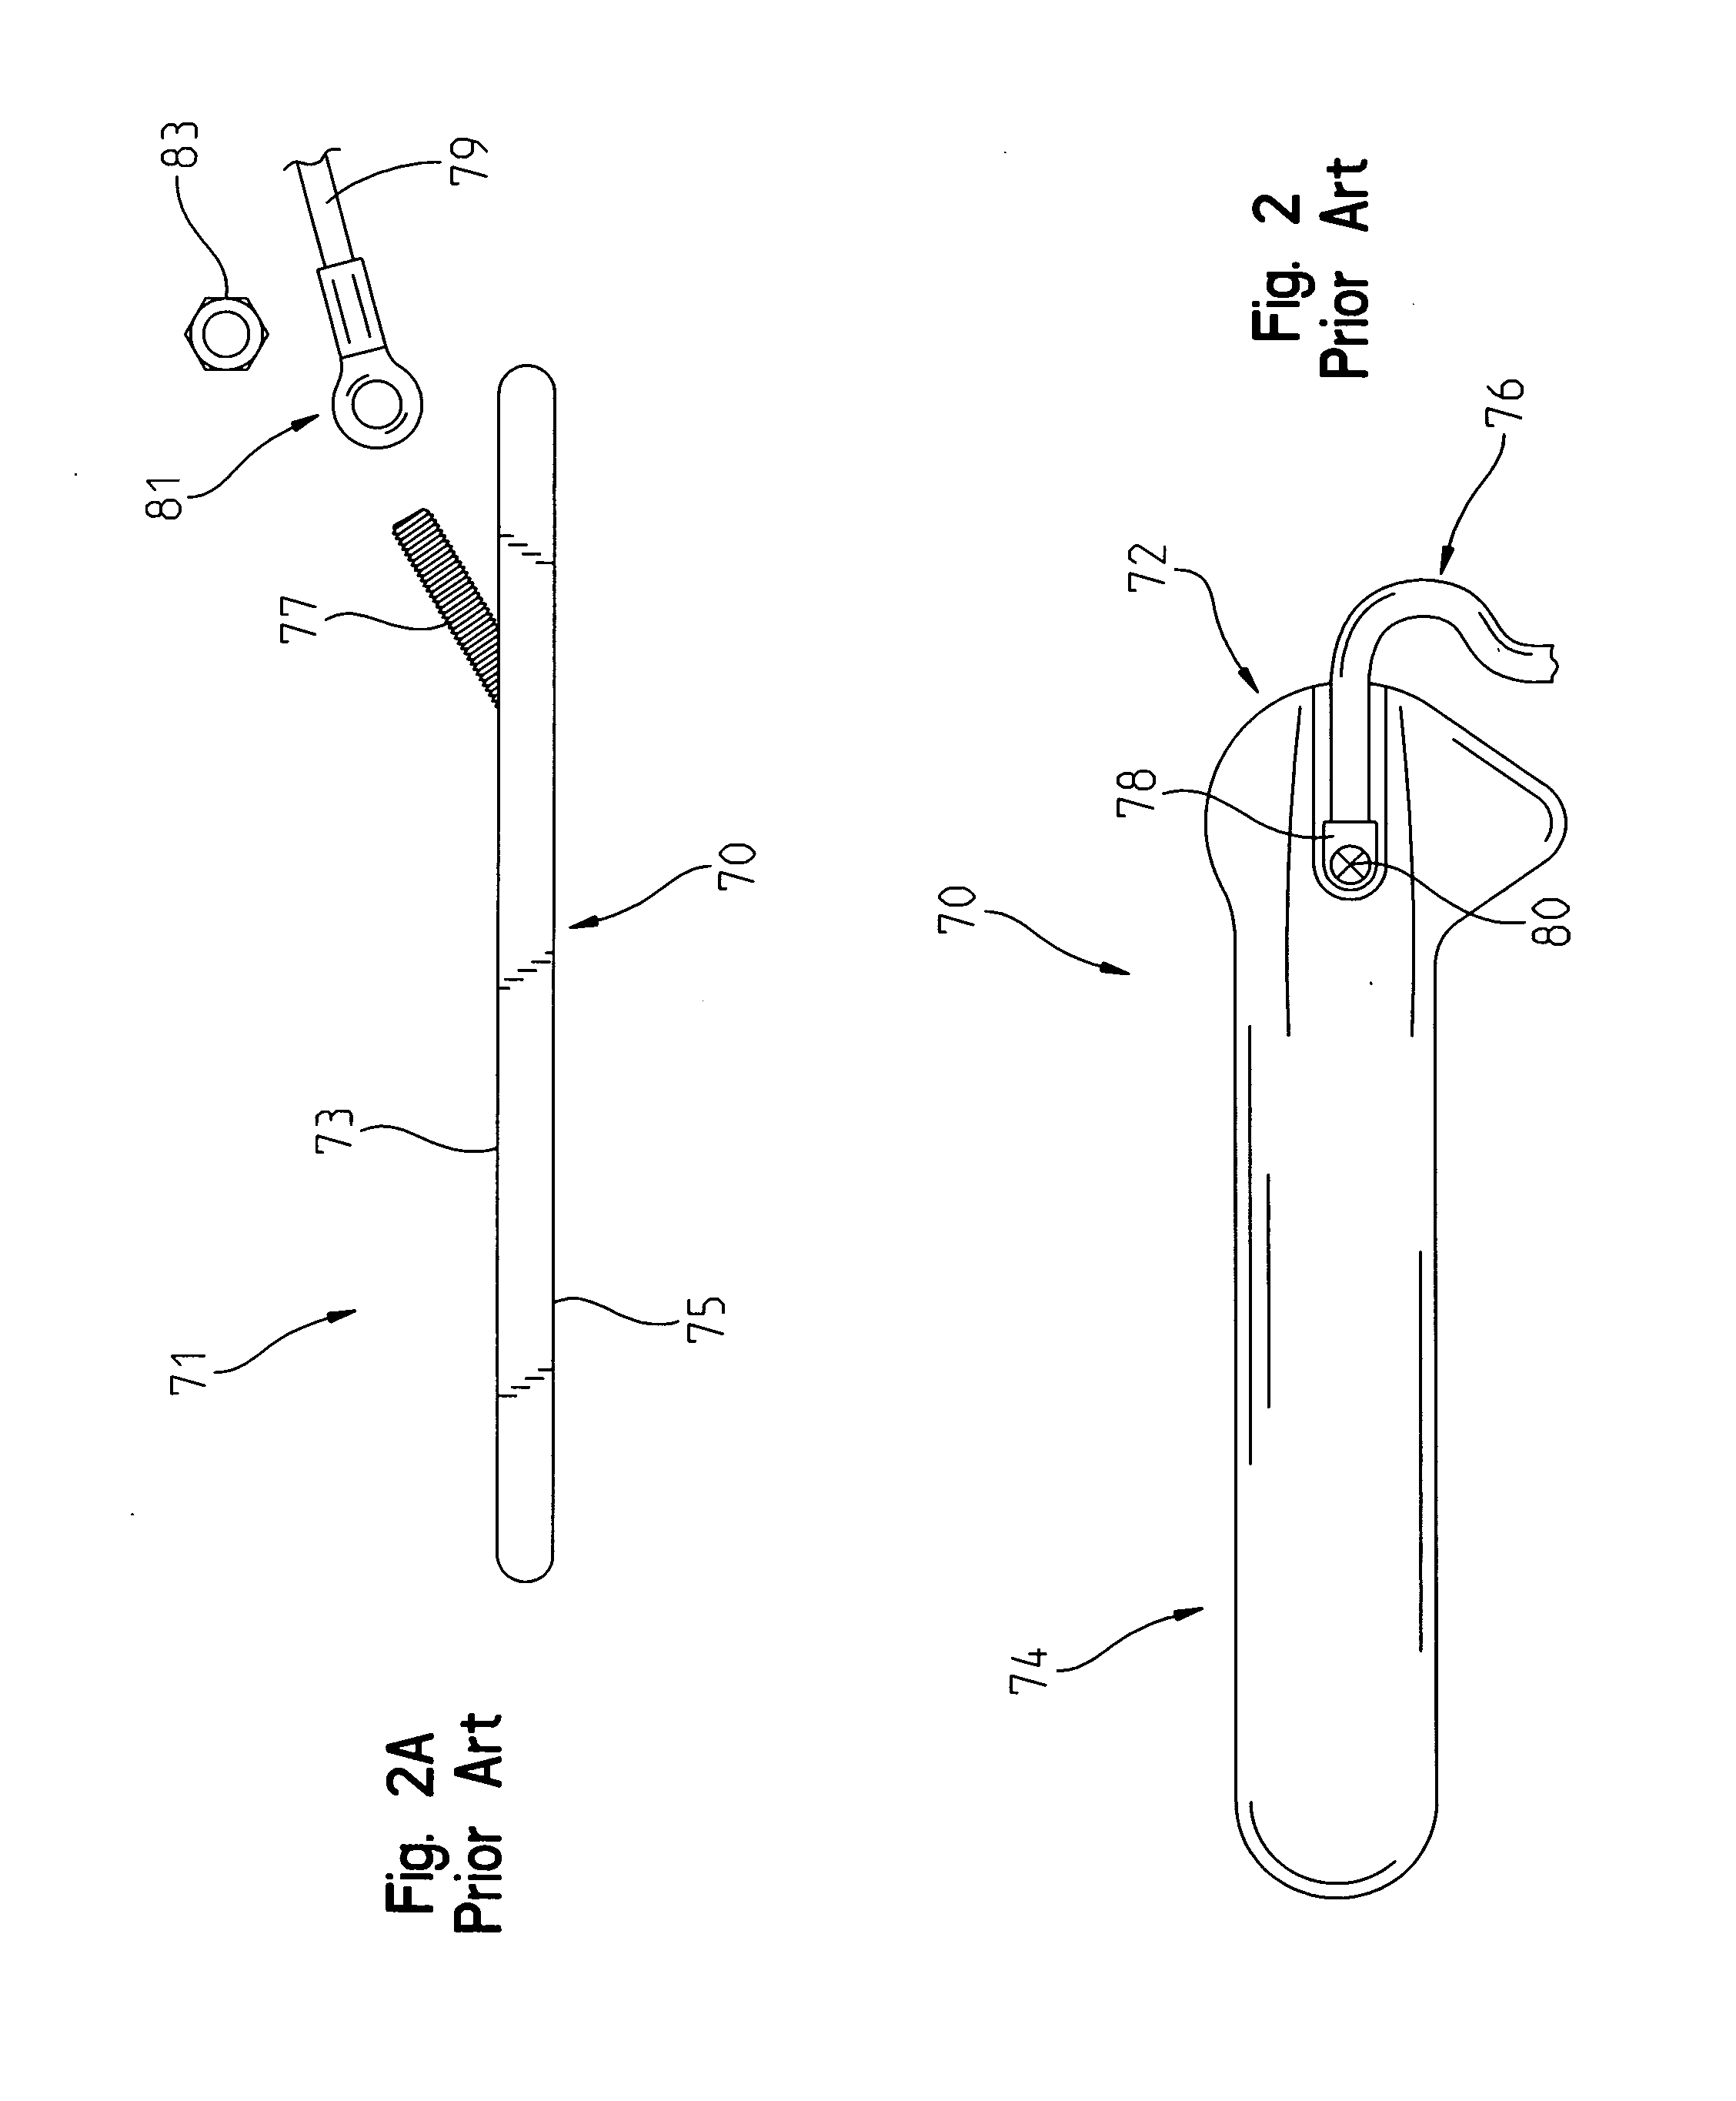 Soft tissue therapy device and method of use therefor